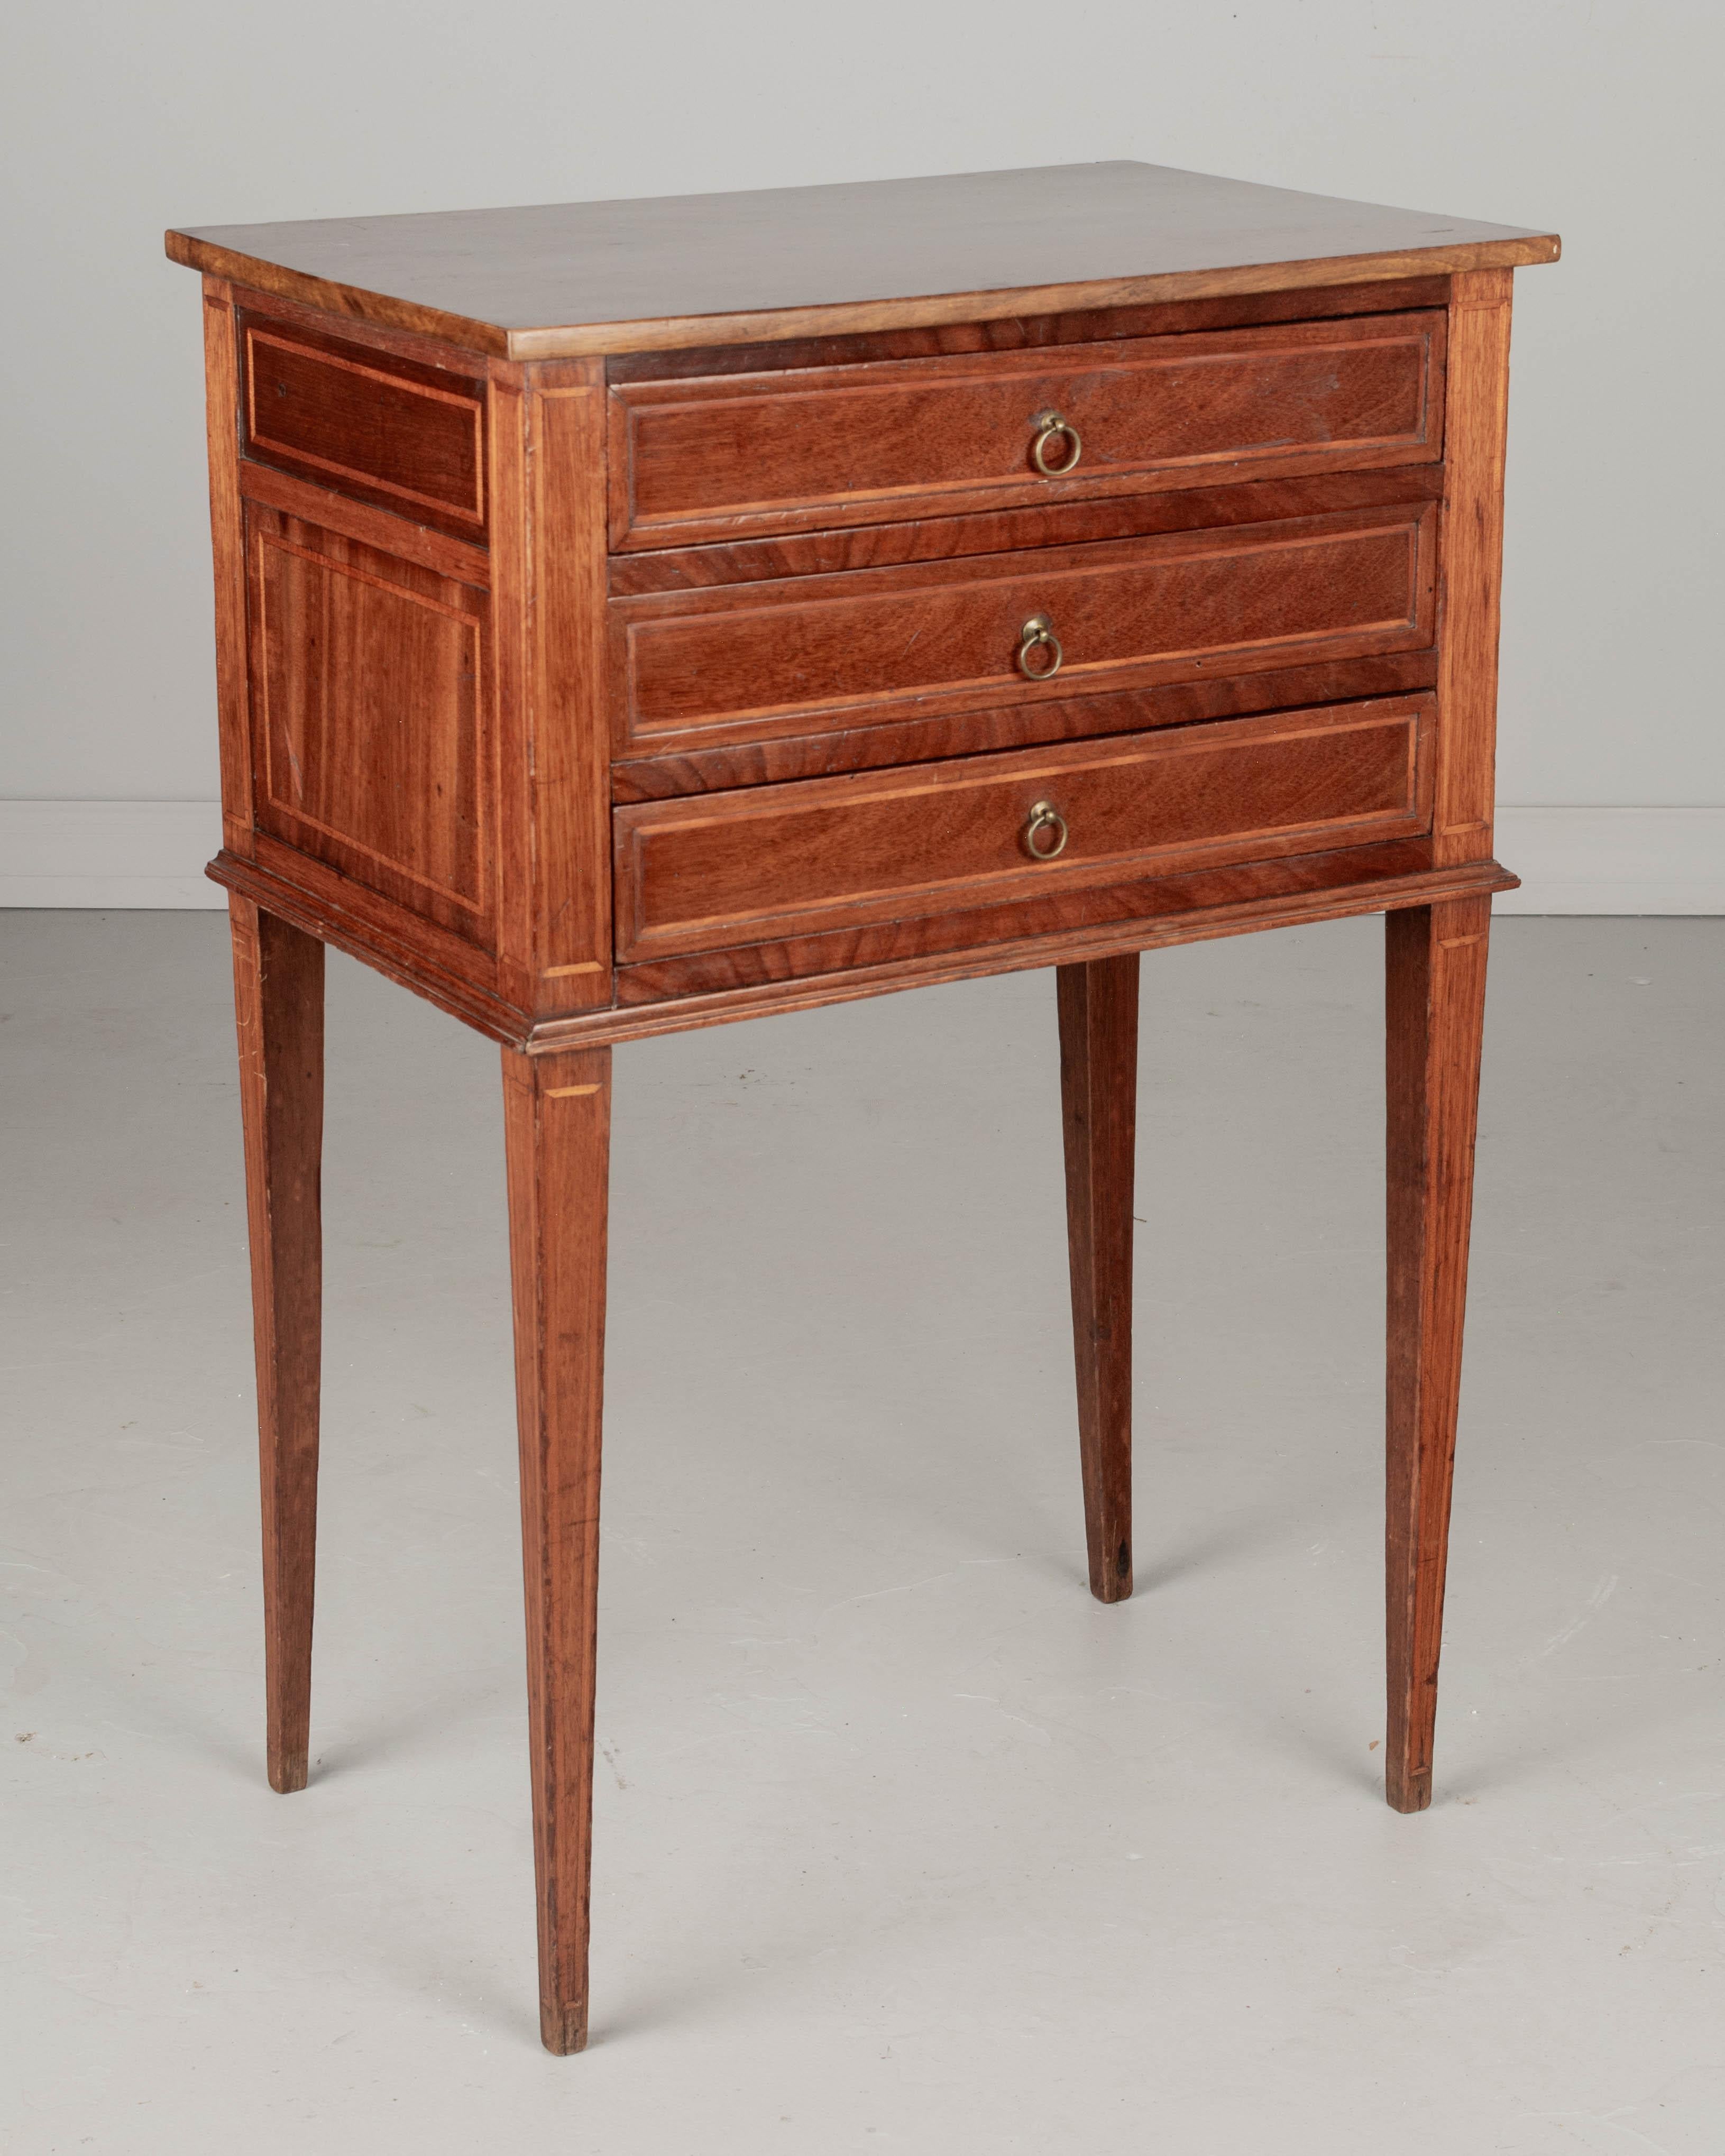 A Country French side table, handcrafted of solid mahogany and finished on all four sides. Three dovetailed drawers with small brass ring pulls. Sturdy slender tapered legs. Pegged construction. Waxed patina. Good proportions for use as a nightstand